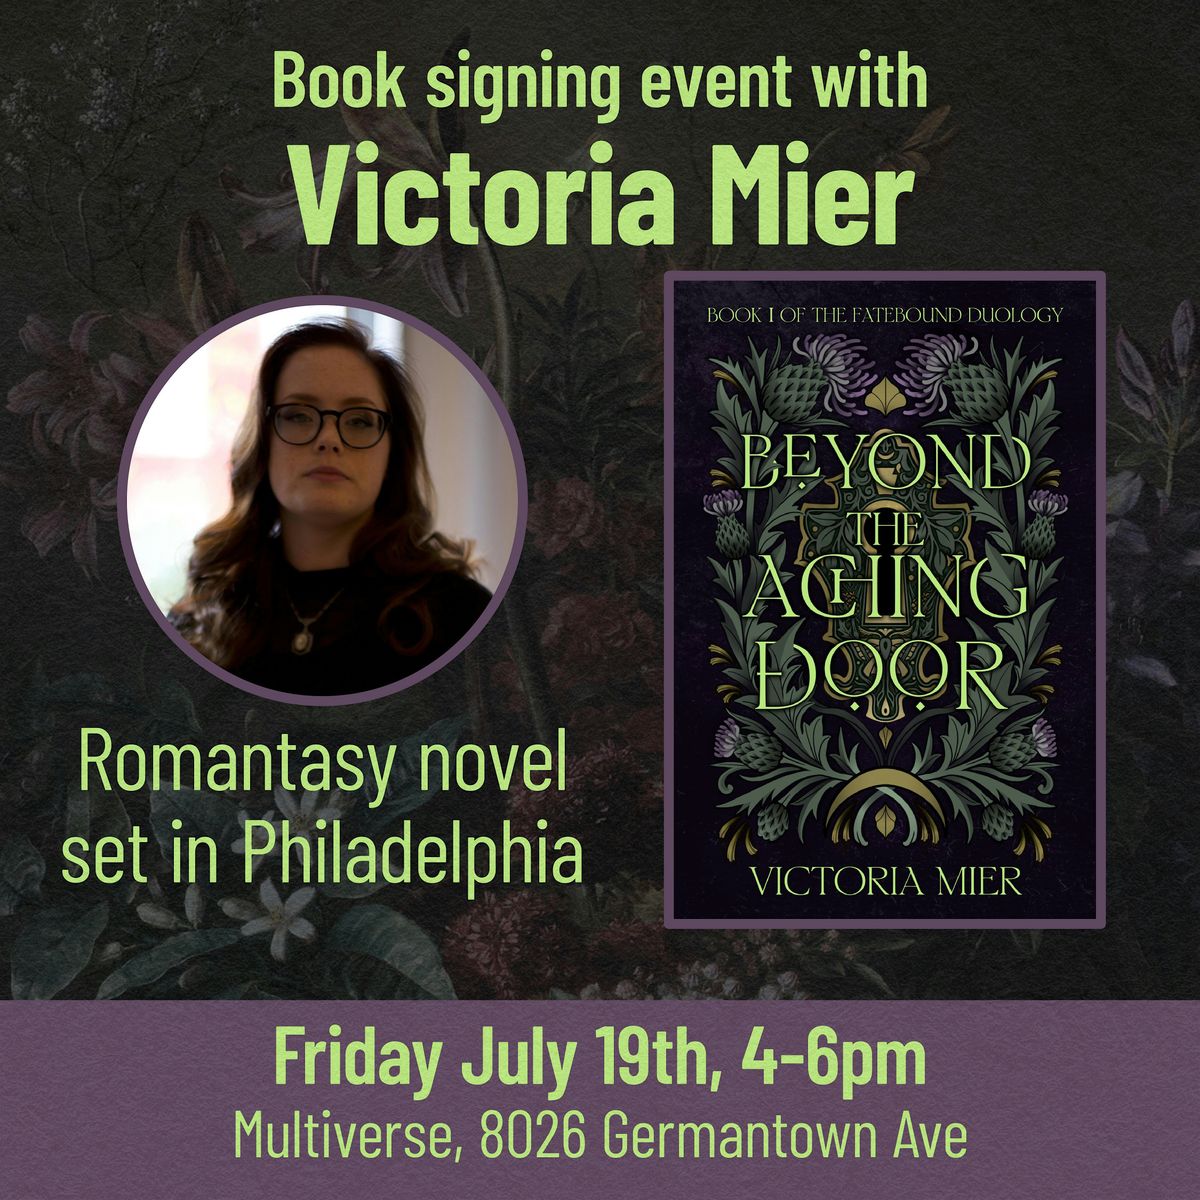 "Beyond The Aching Door" Book Signing Event With Victoria Mier